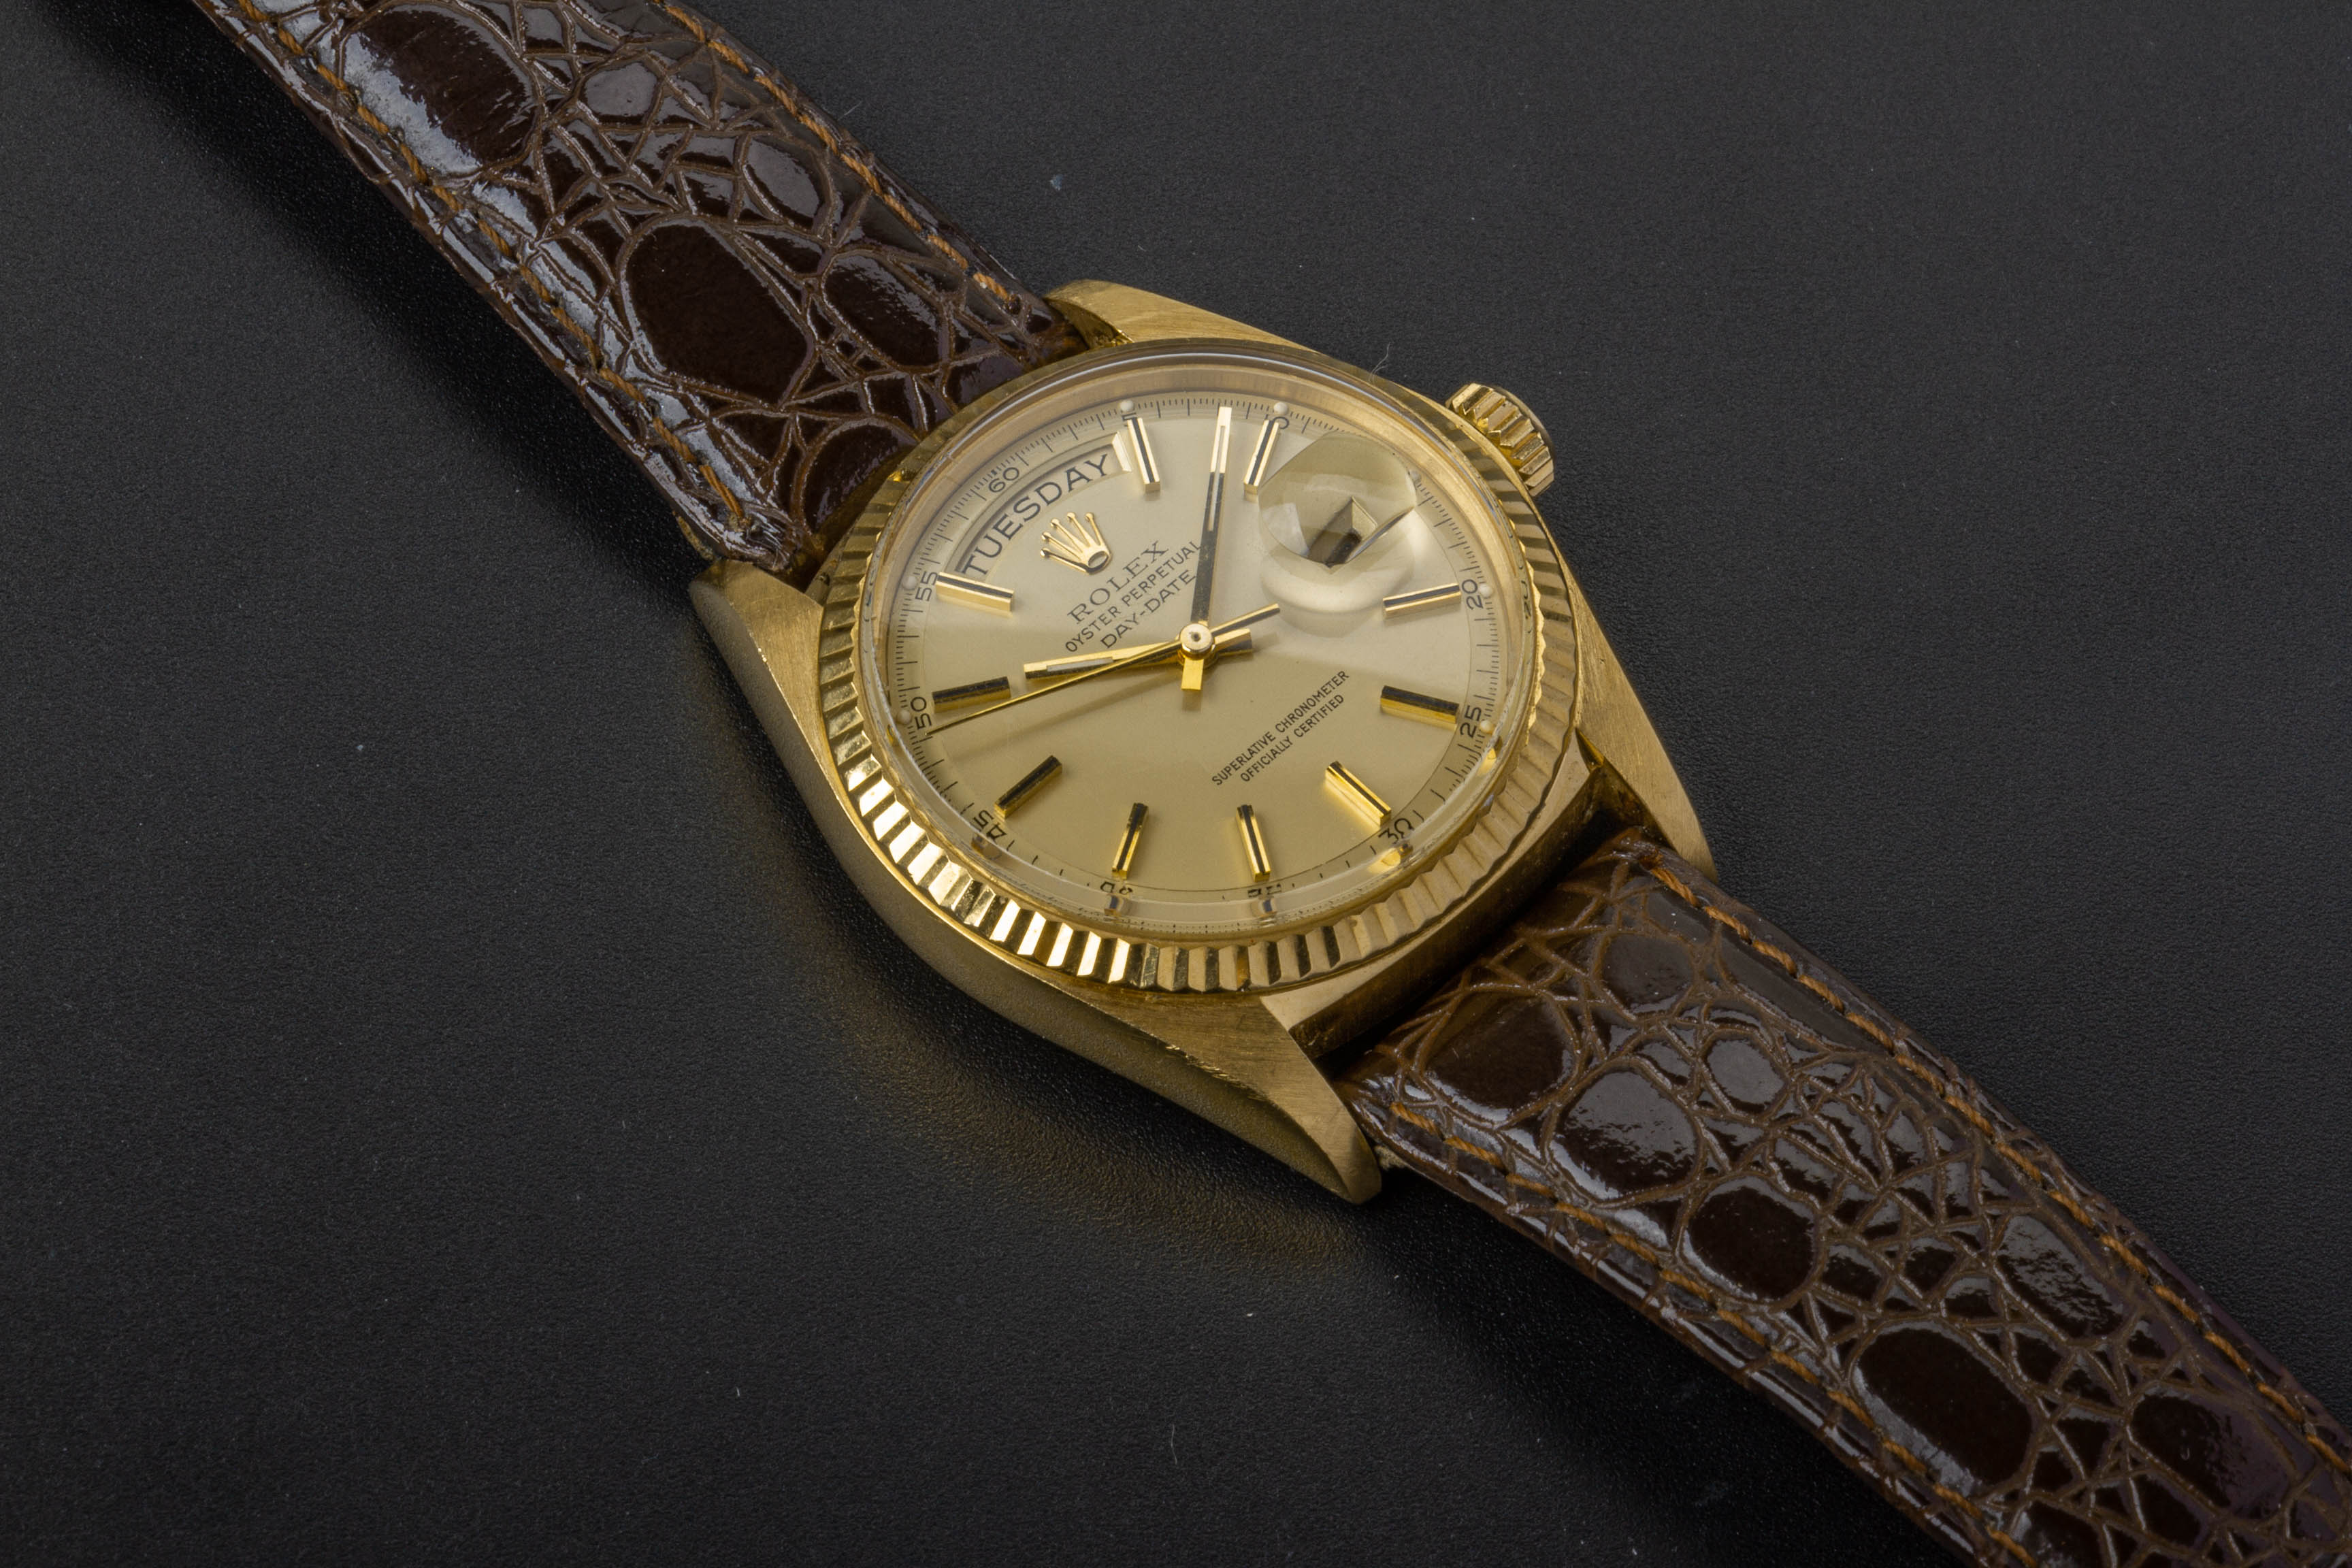 A ROLEX GOLD OYSTER PERPETUAL DAY DATE AUTOMATIC WRISTWATCH - Image 2 of 2